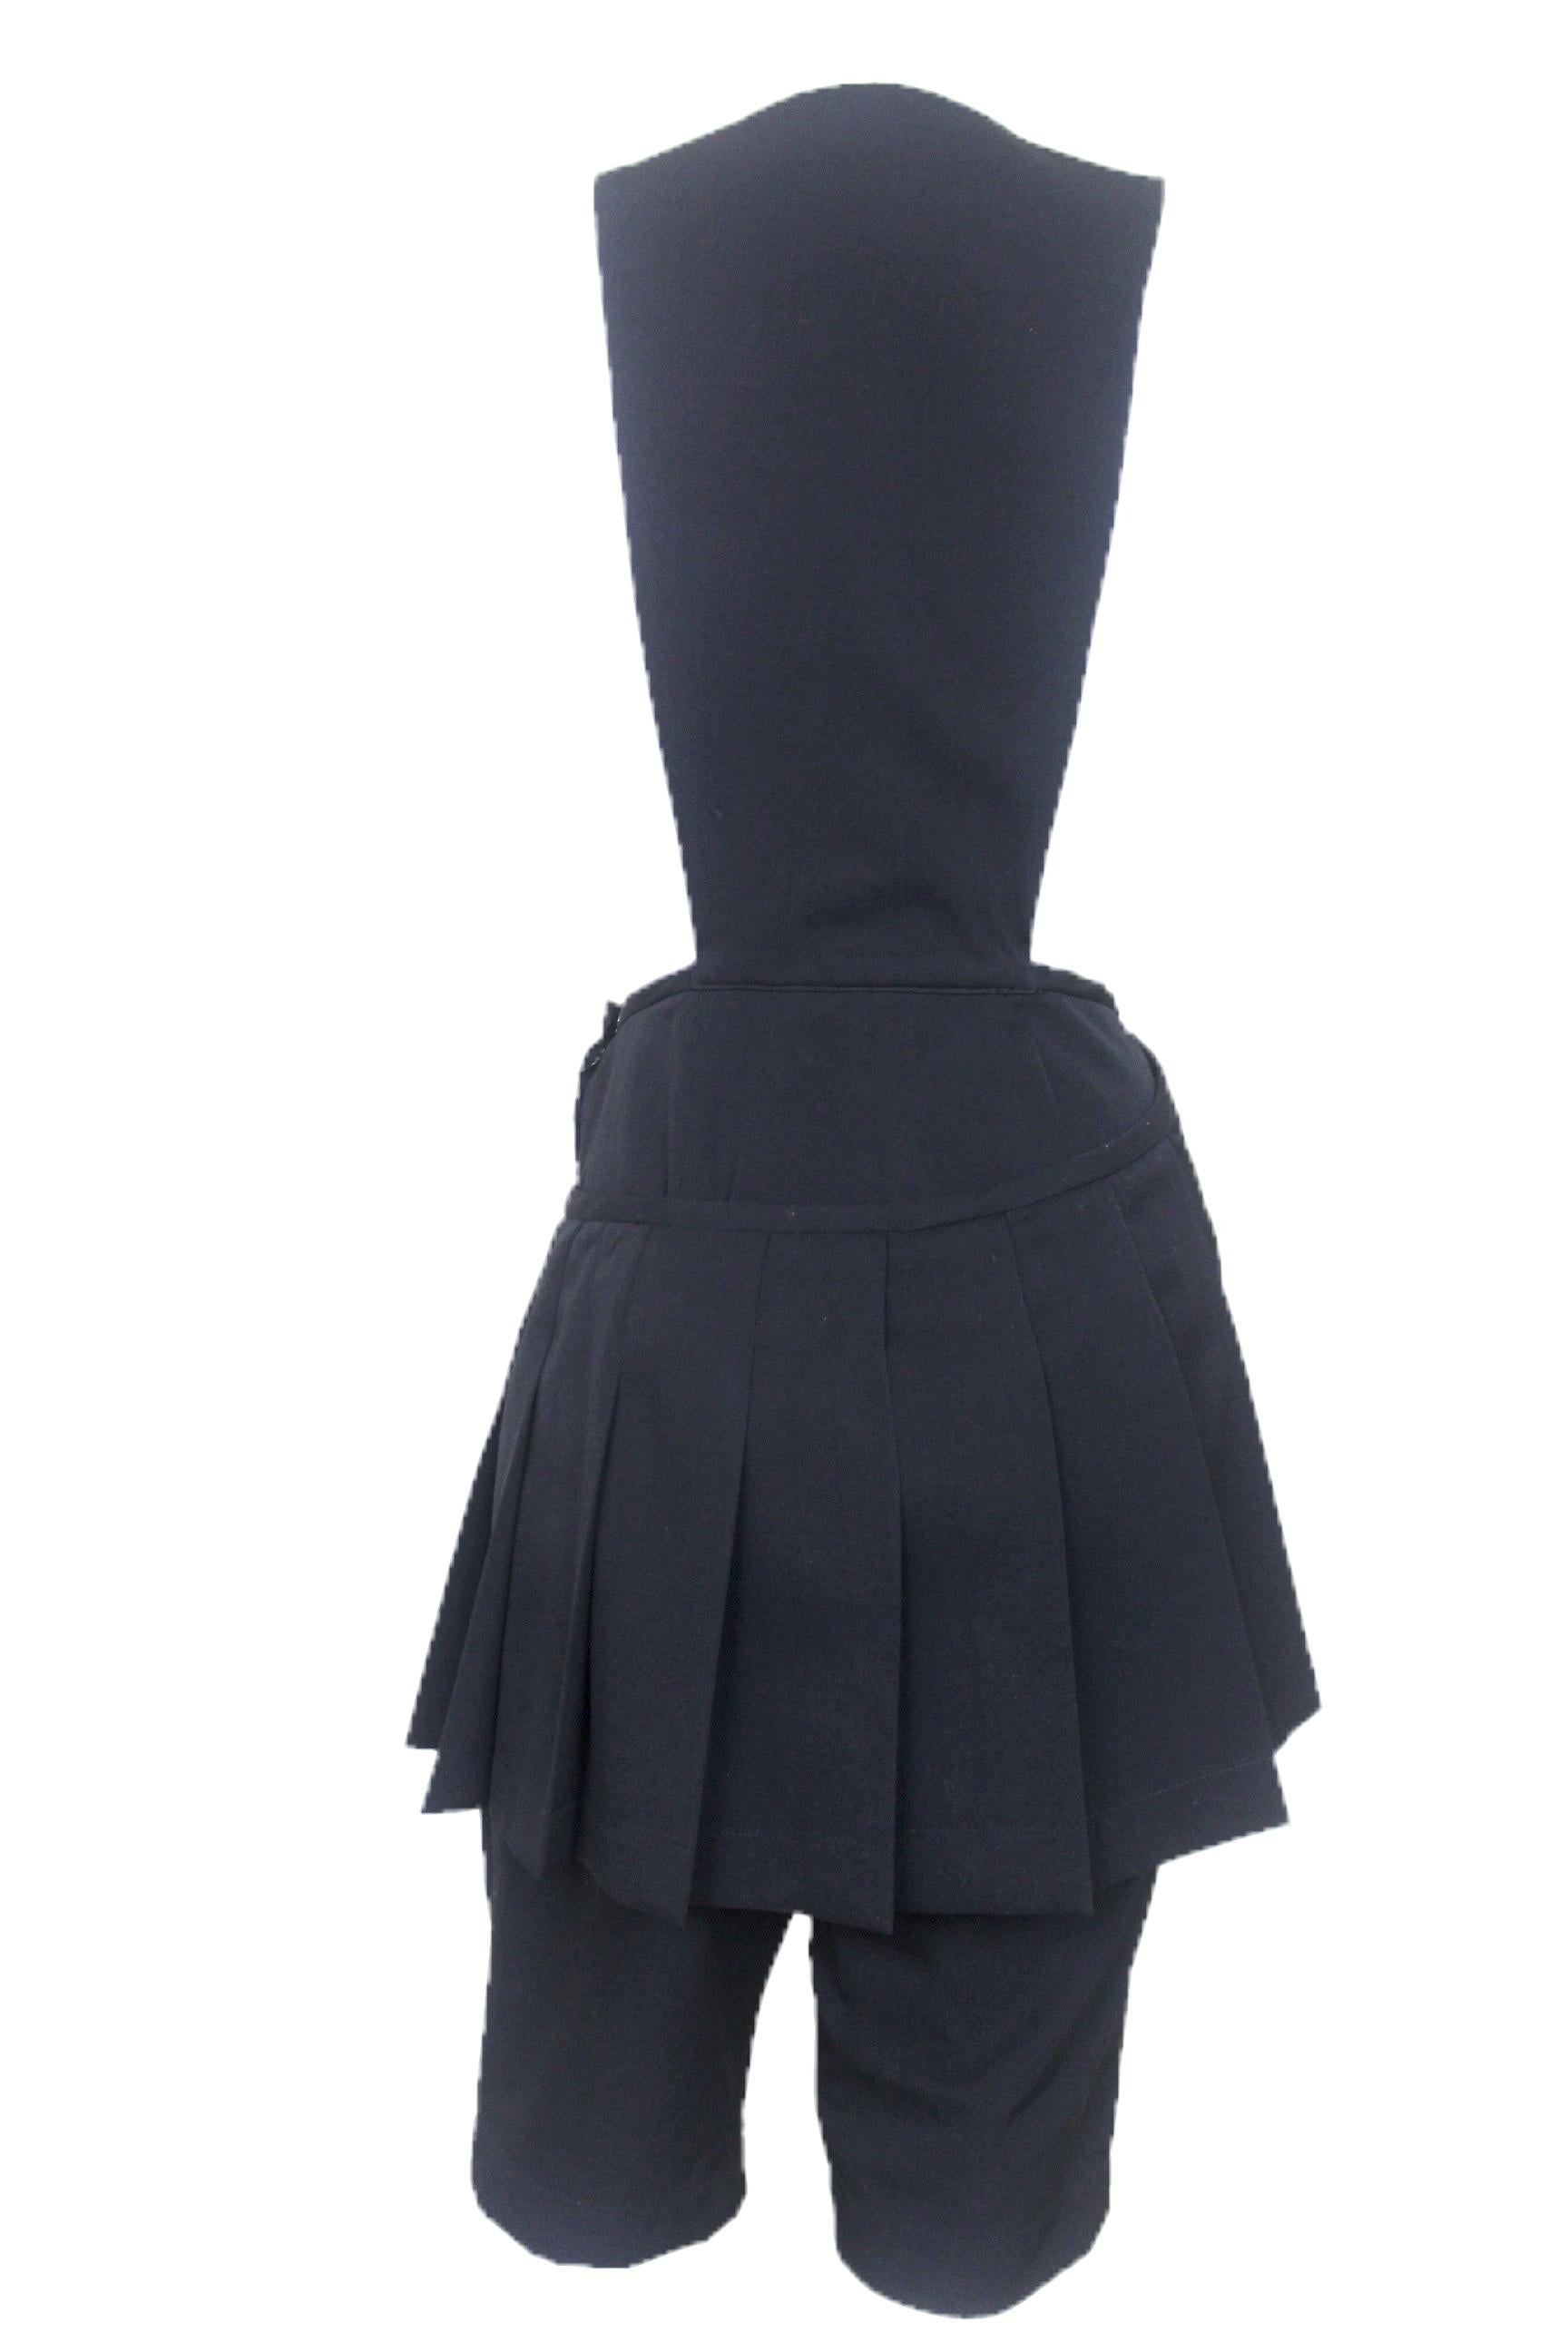 Comme des Garcons 1989 Collection Reverse Dungarees with attached Skirt For Sale 9